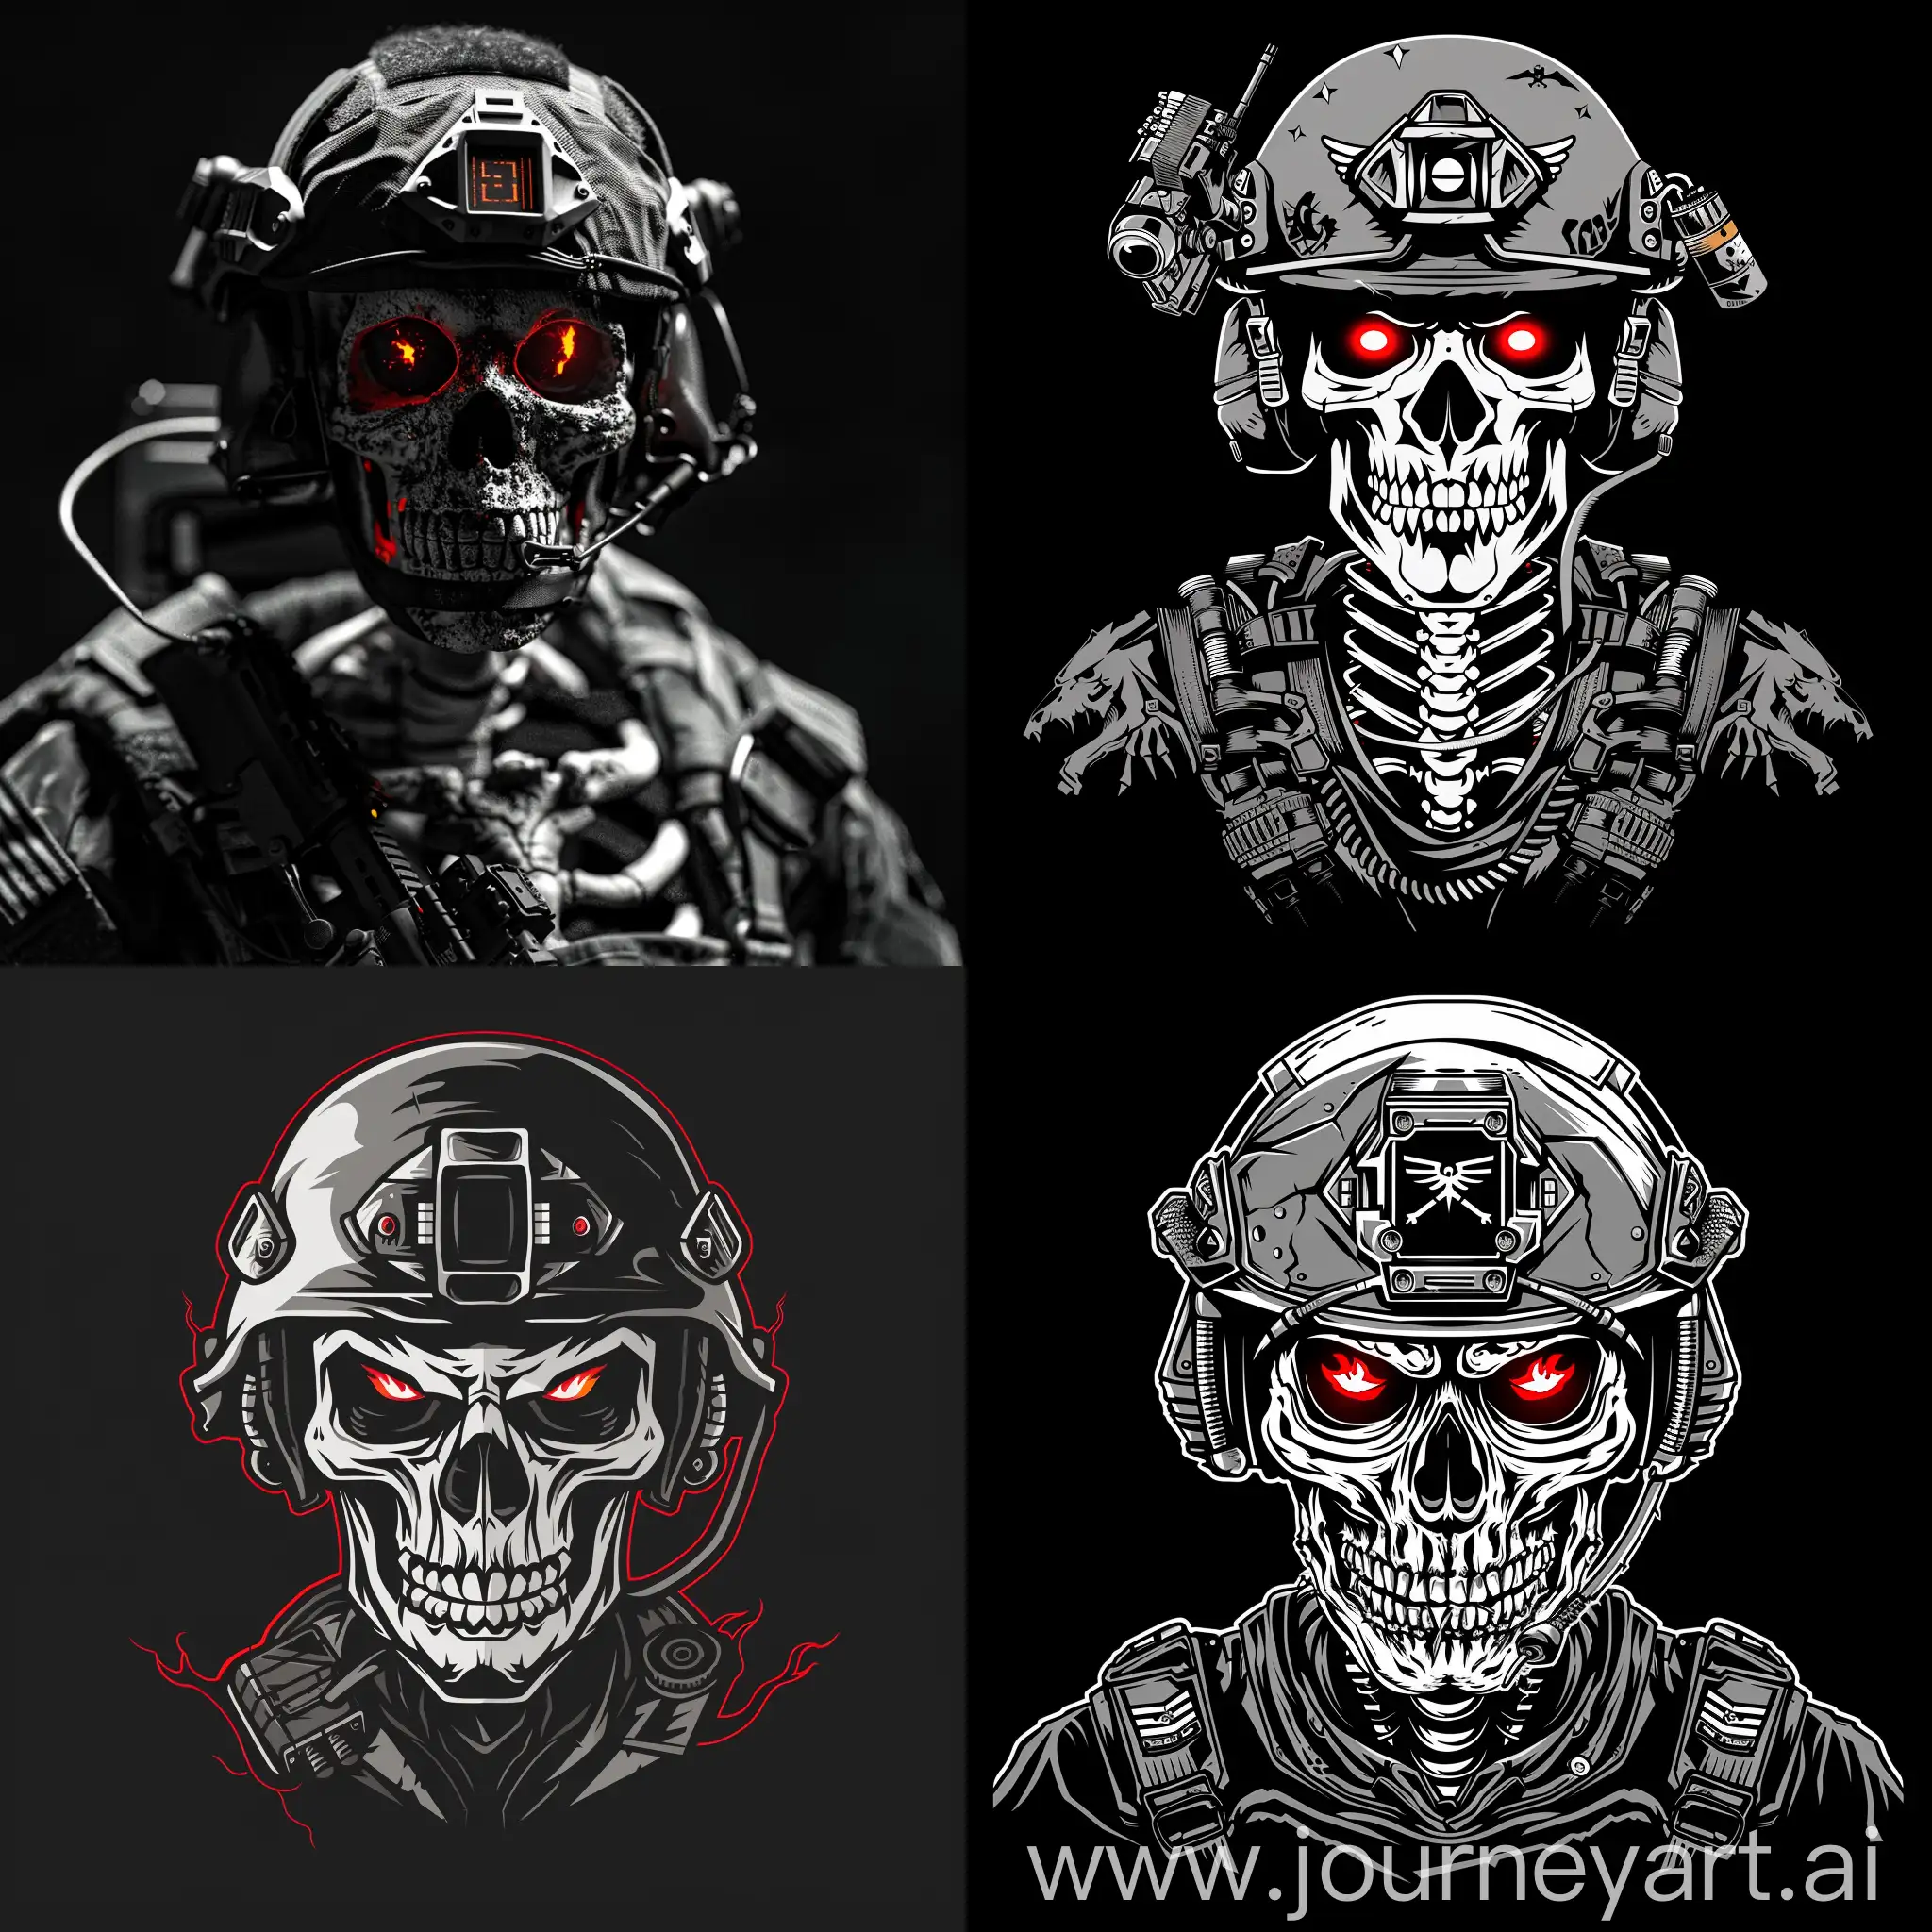 5 undead soldier look like a skeleton with modern military equipment, logo, burning red eyes, modern military helmet, black and white, black background